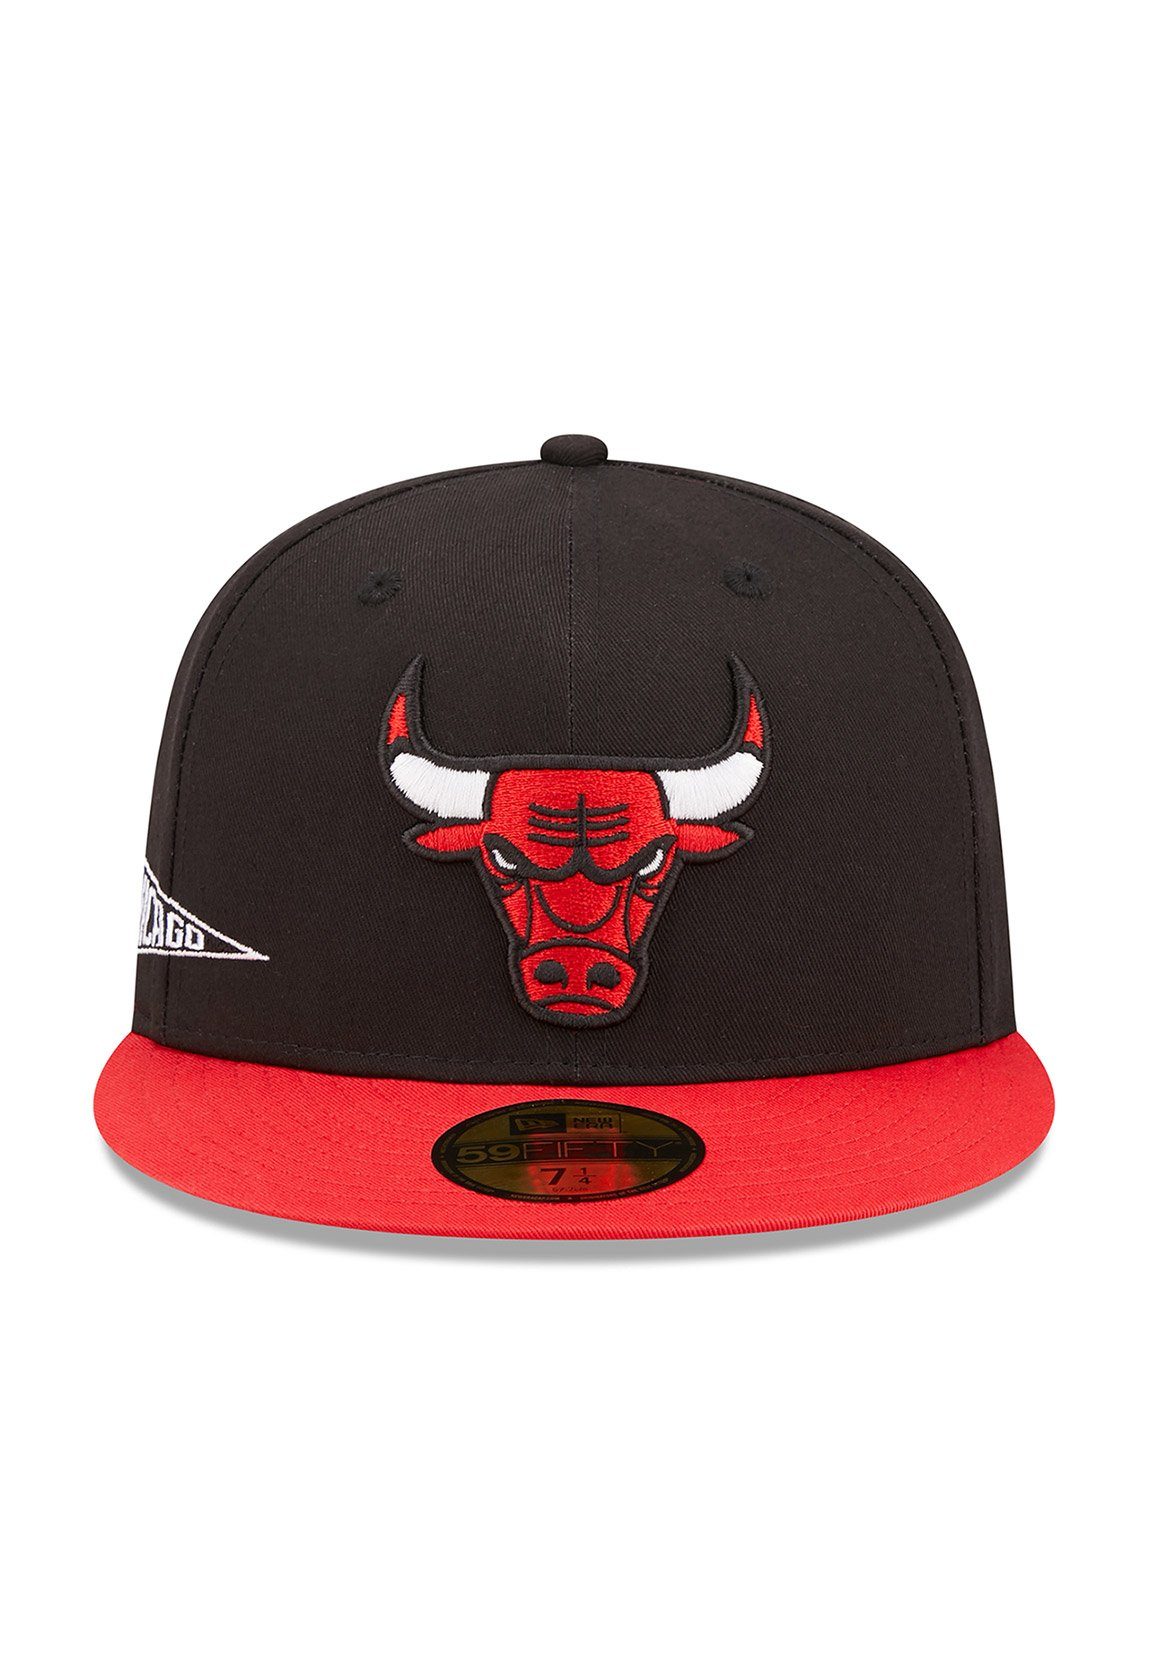 New Era Fitted Cap New 59Fifty Team Schwarz CHICAGO City Rot BULLS Cap Patch